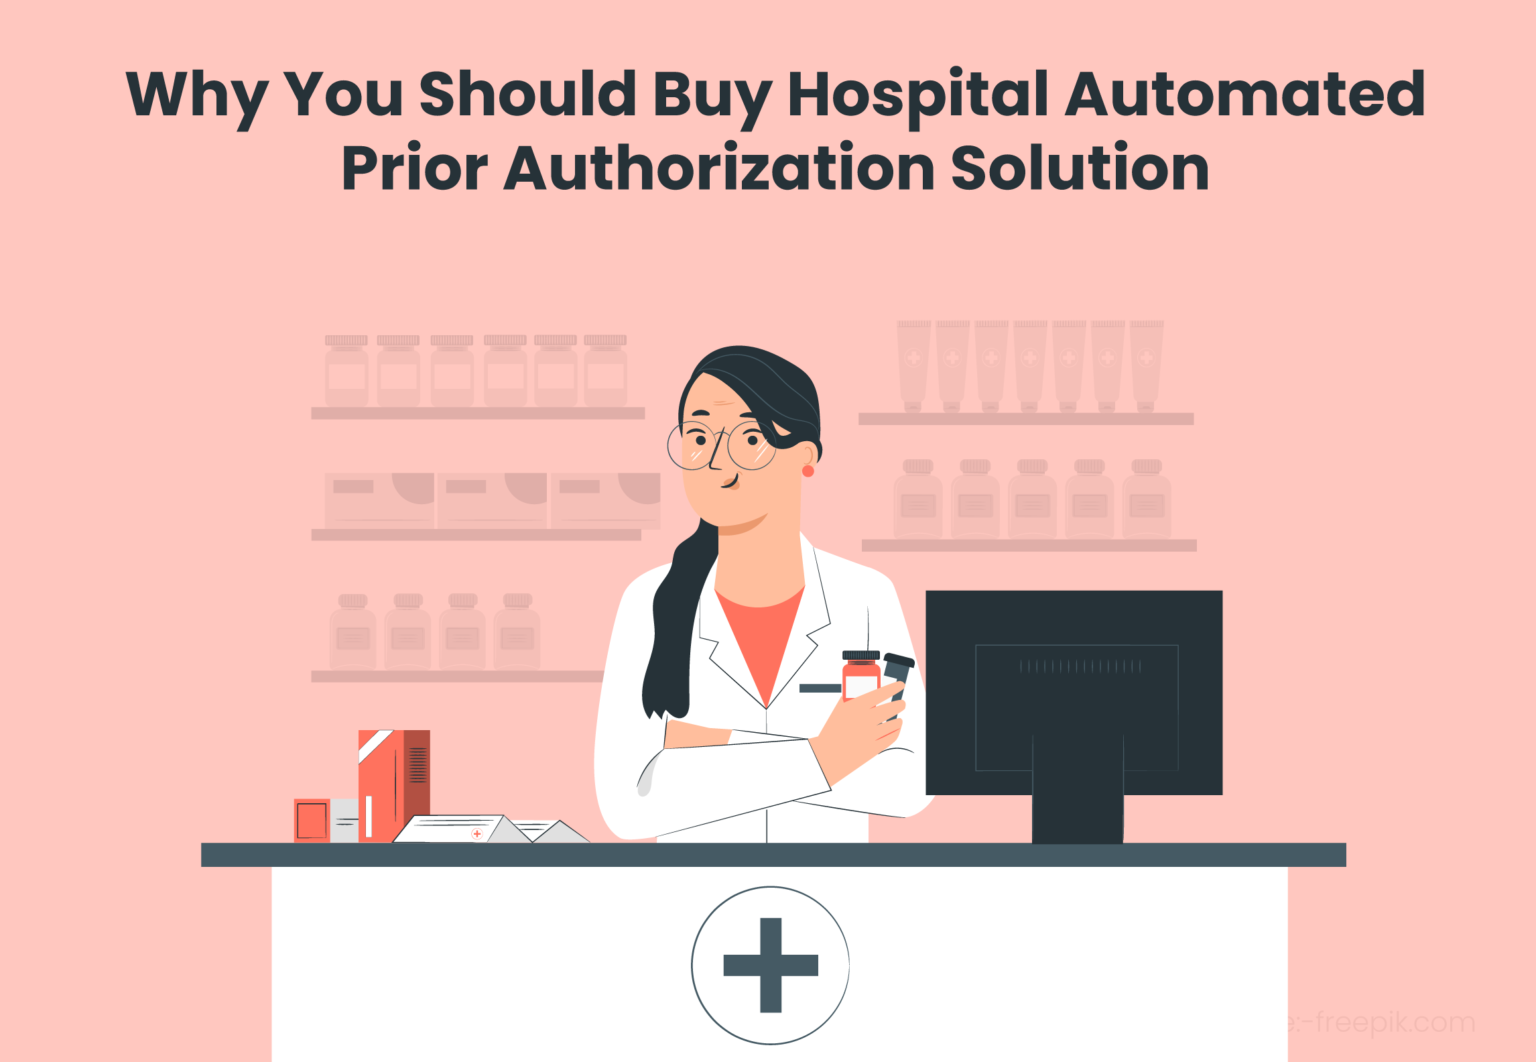 advantages-of-automated-prior-authorization-in-hospitals